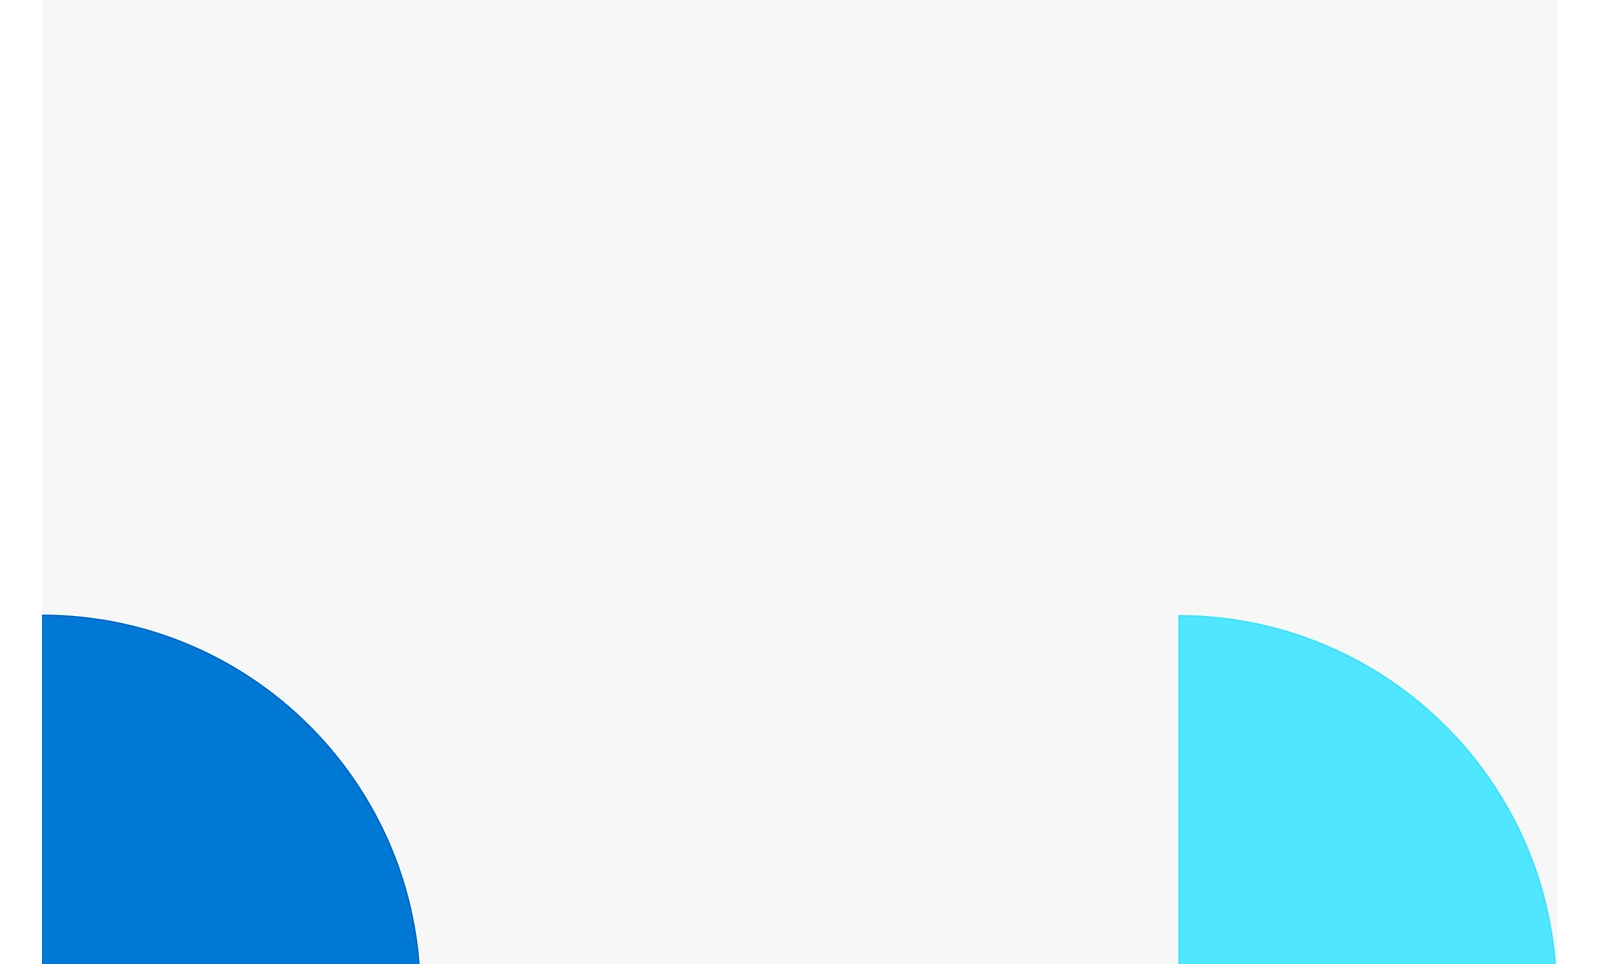 Two overlapping circular shapes with a white background, one blue on the left and a lighter blue on the right.